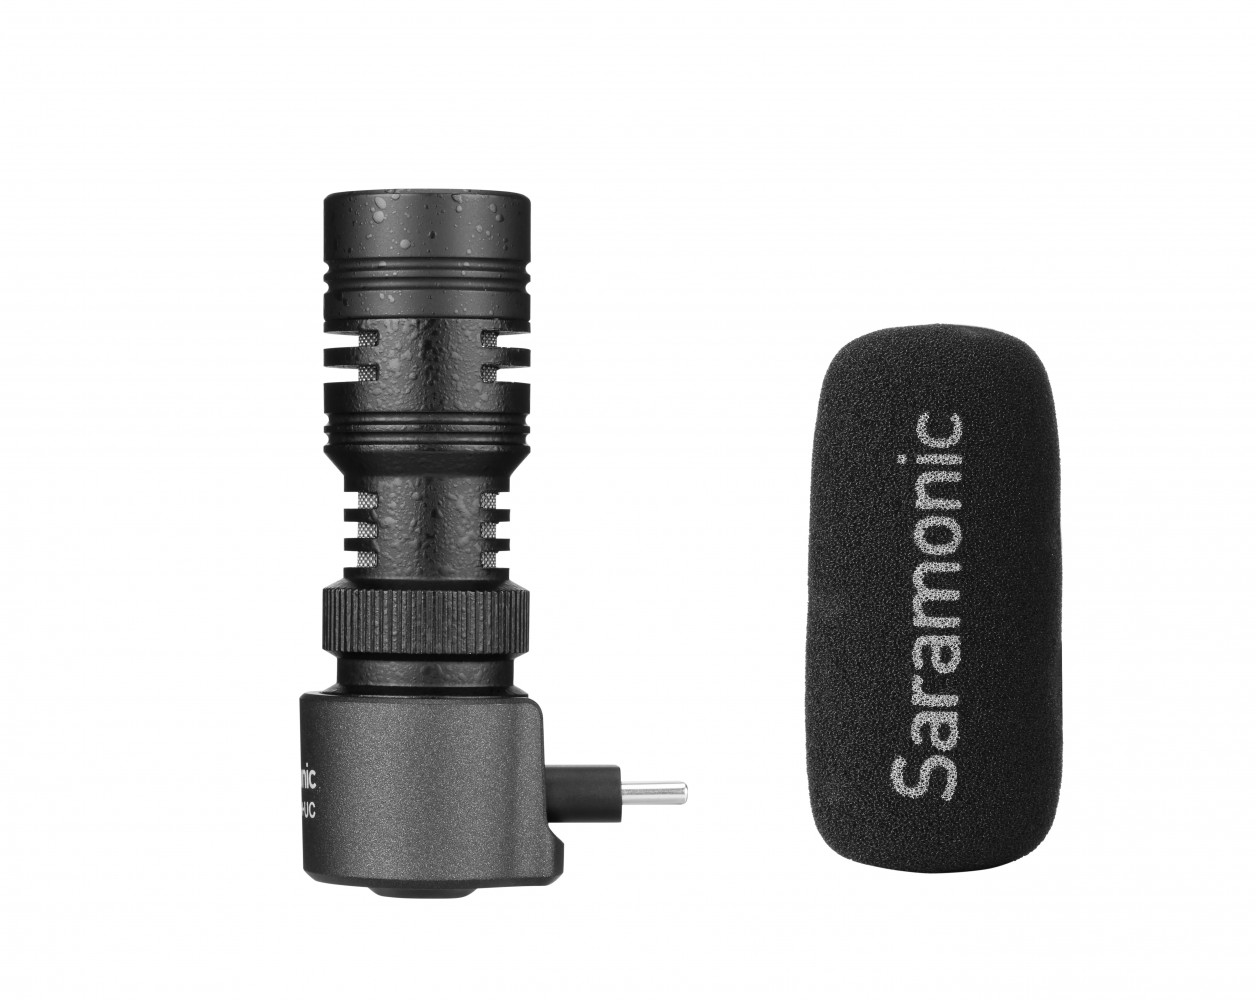 Saramonic SmartMic+ UC Directional Microphone with USB-C Connector for Android Devices